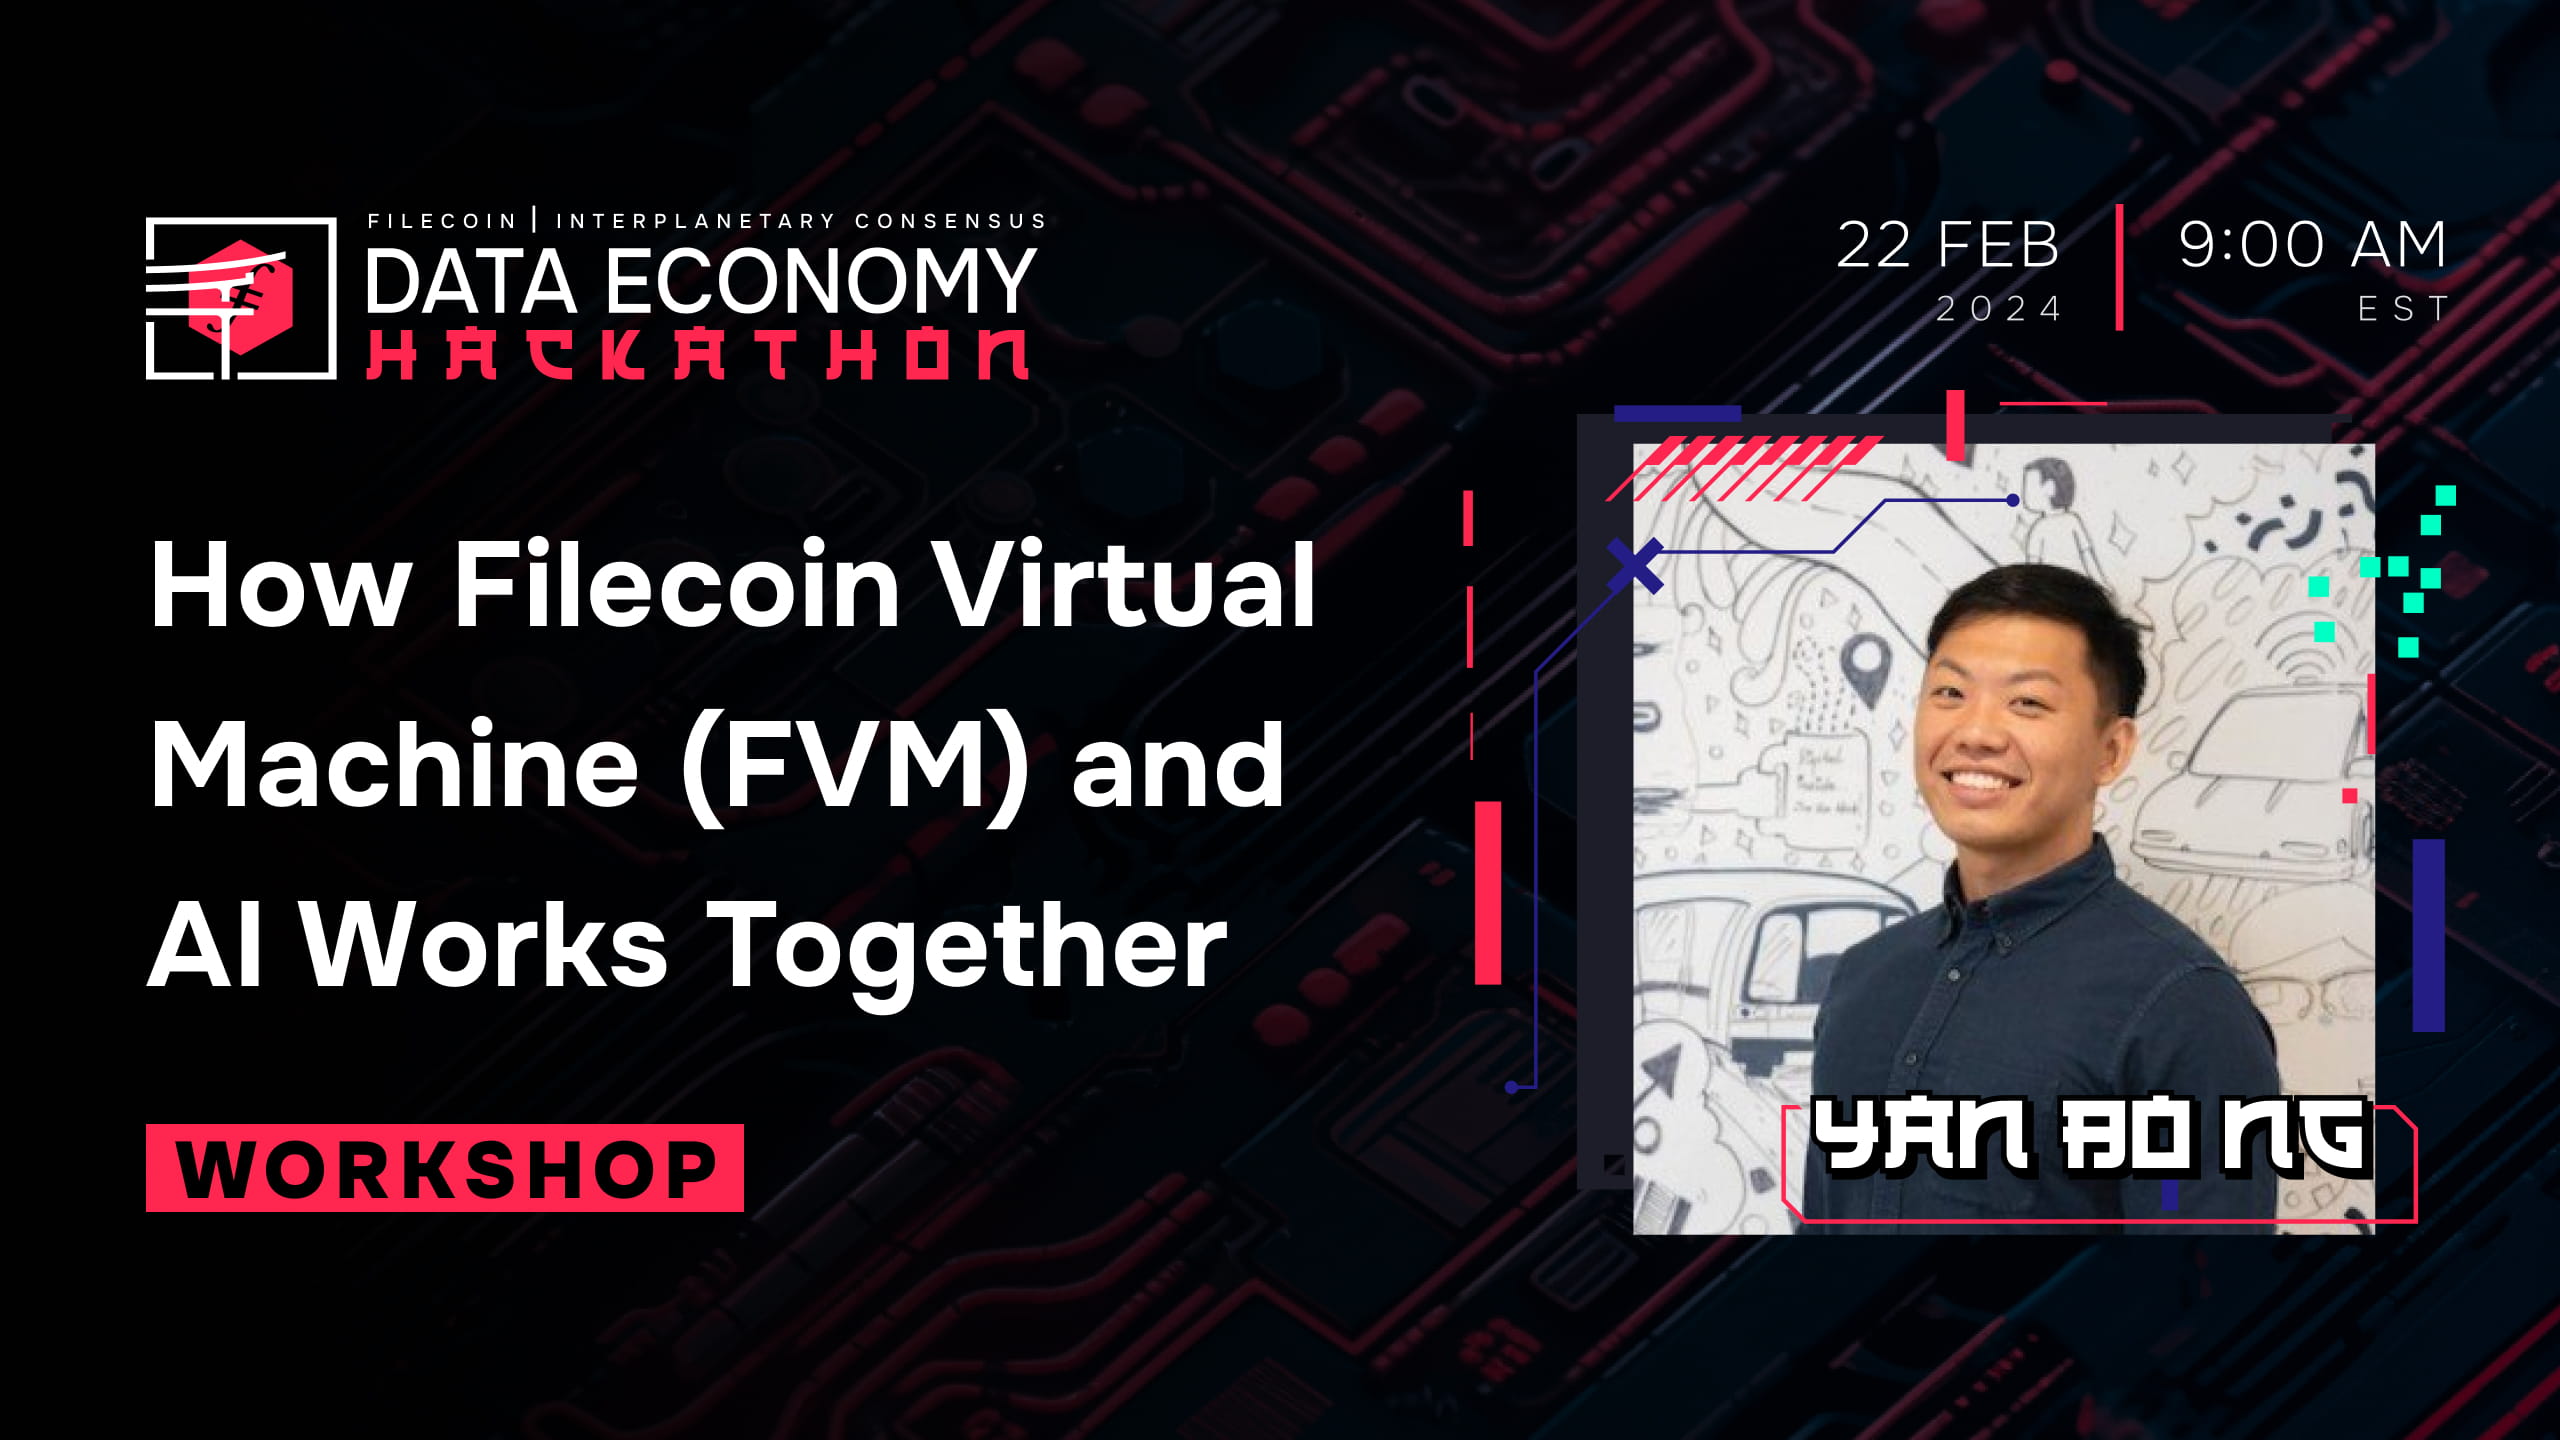 How Filecoin Virtual Machine (FVM) and AI Works Together